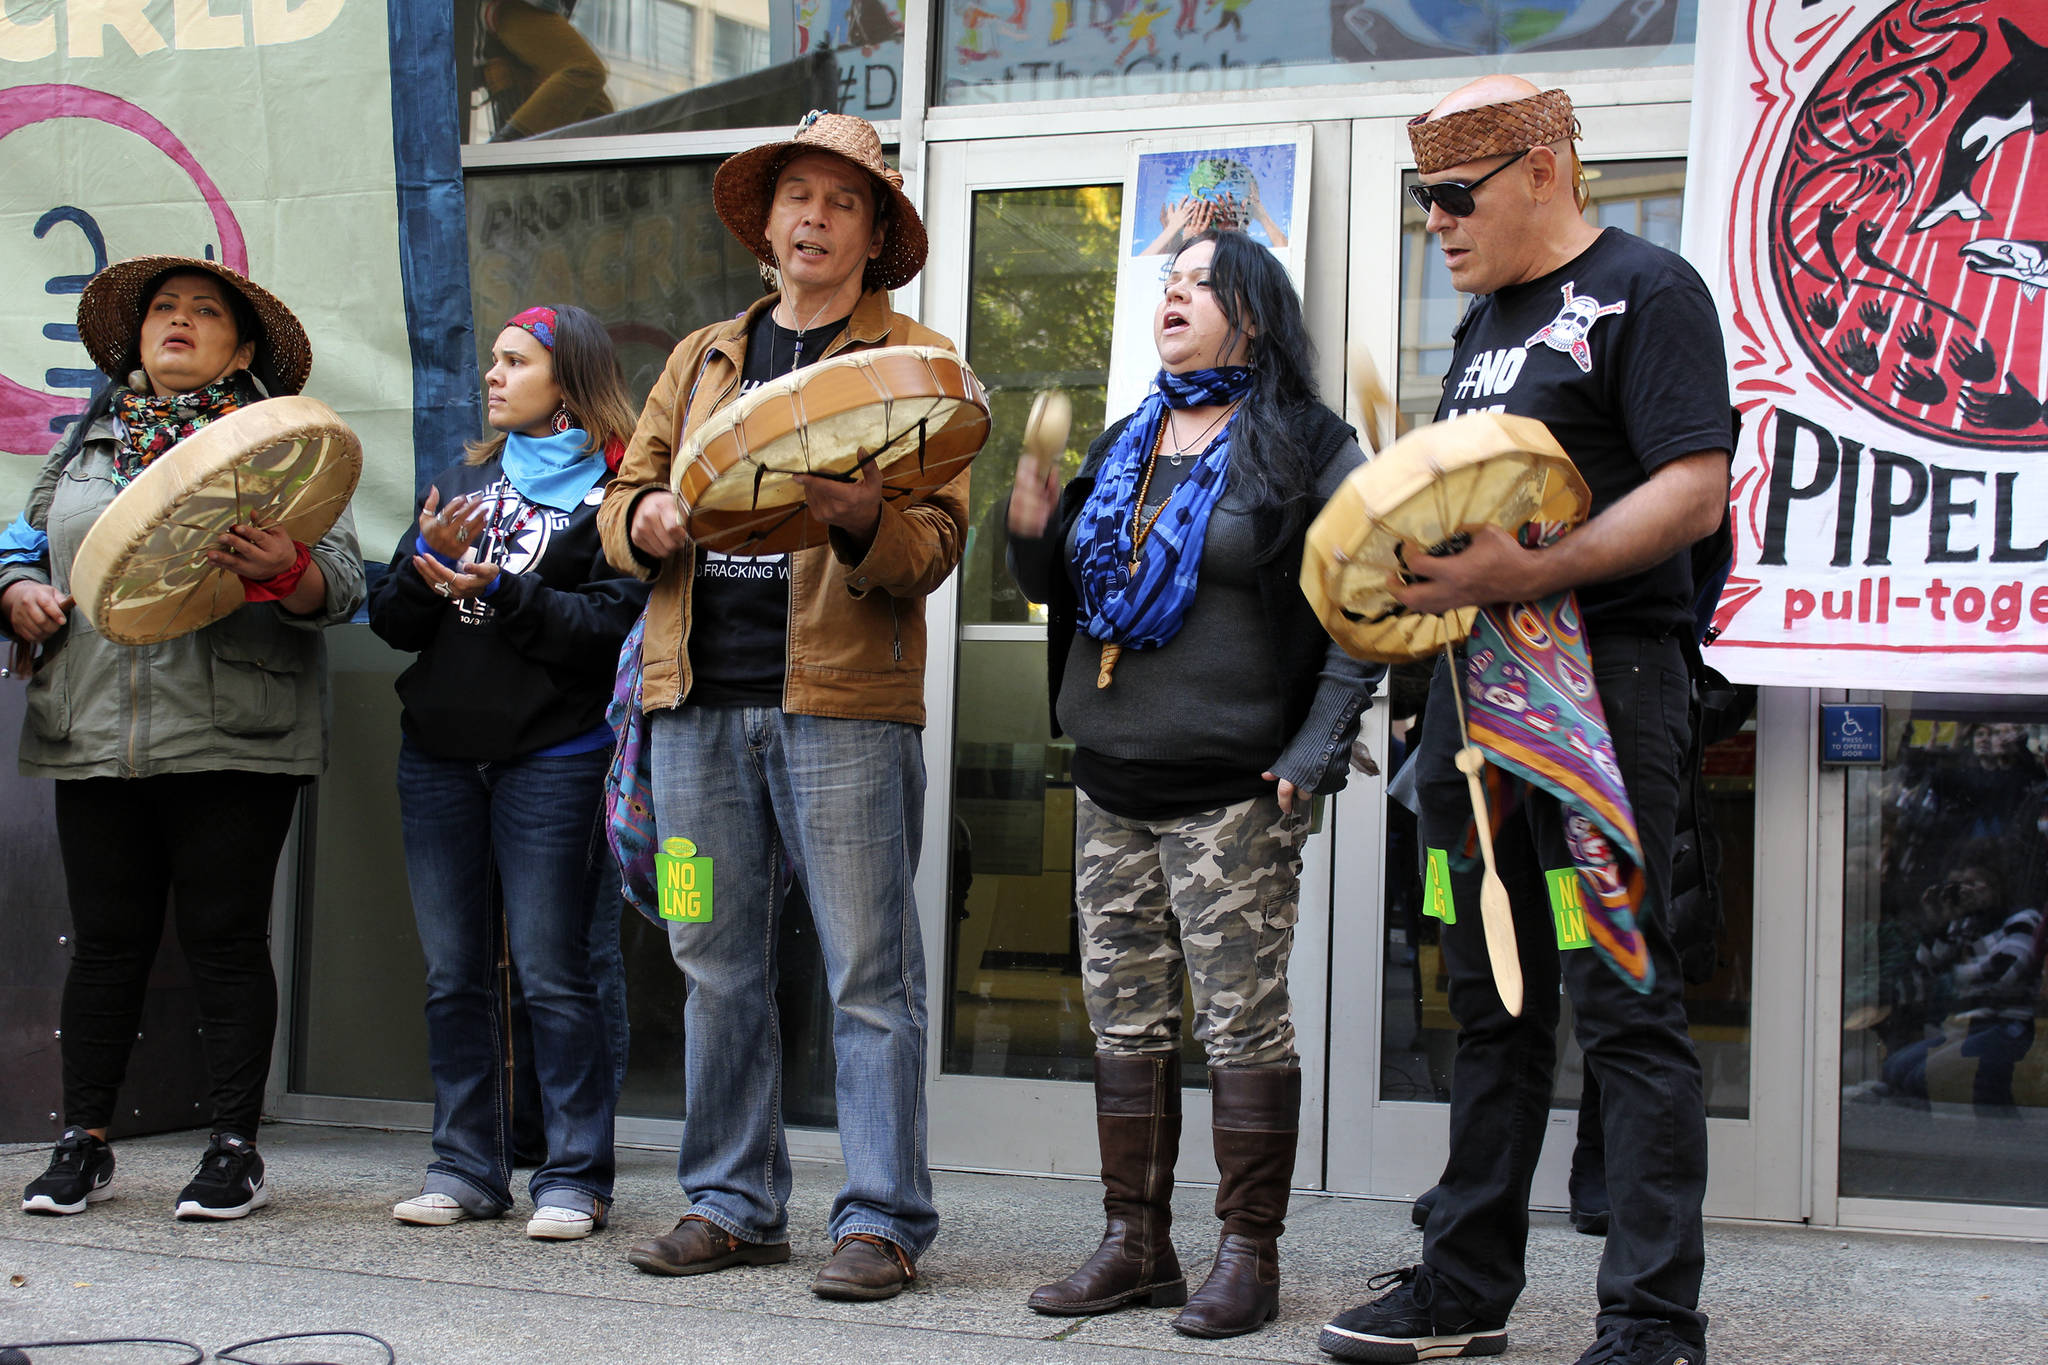 Activists Disrupt Over 100 Bank Branches Across Seattle for Financing Tar Sands Projects